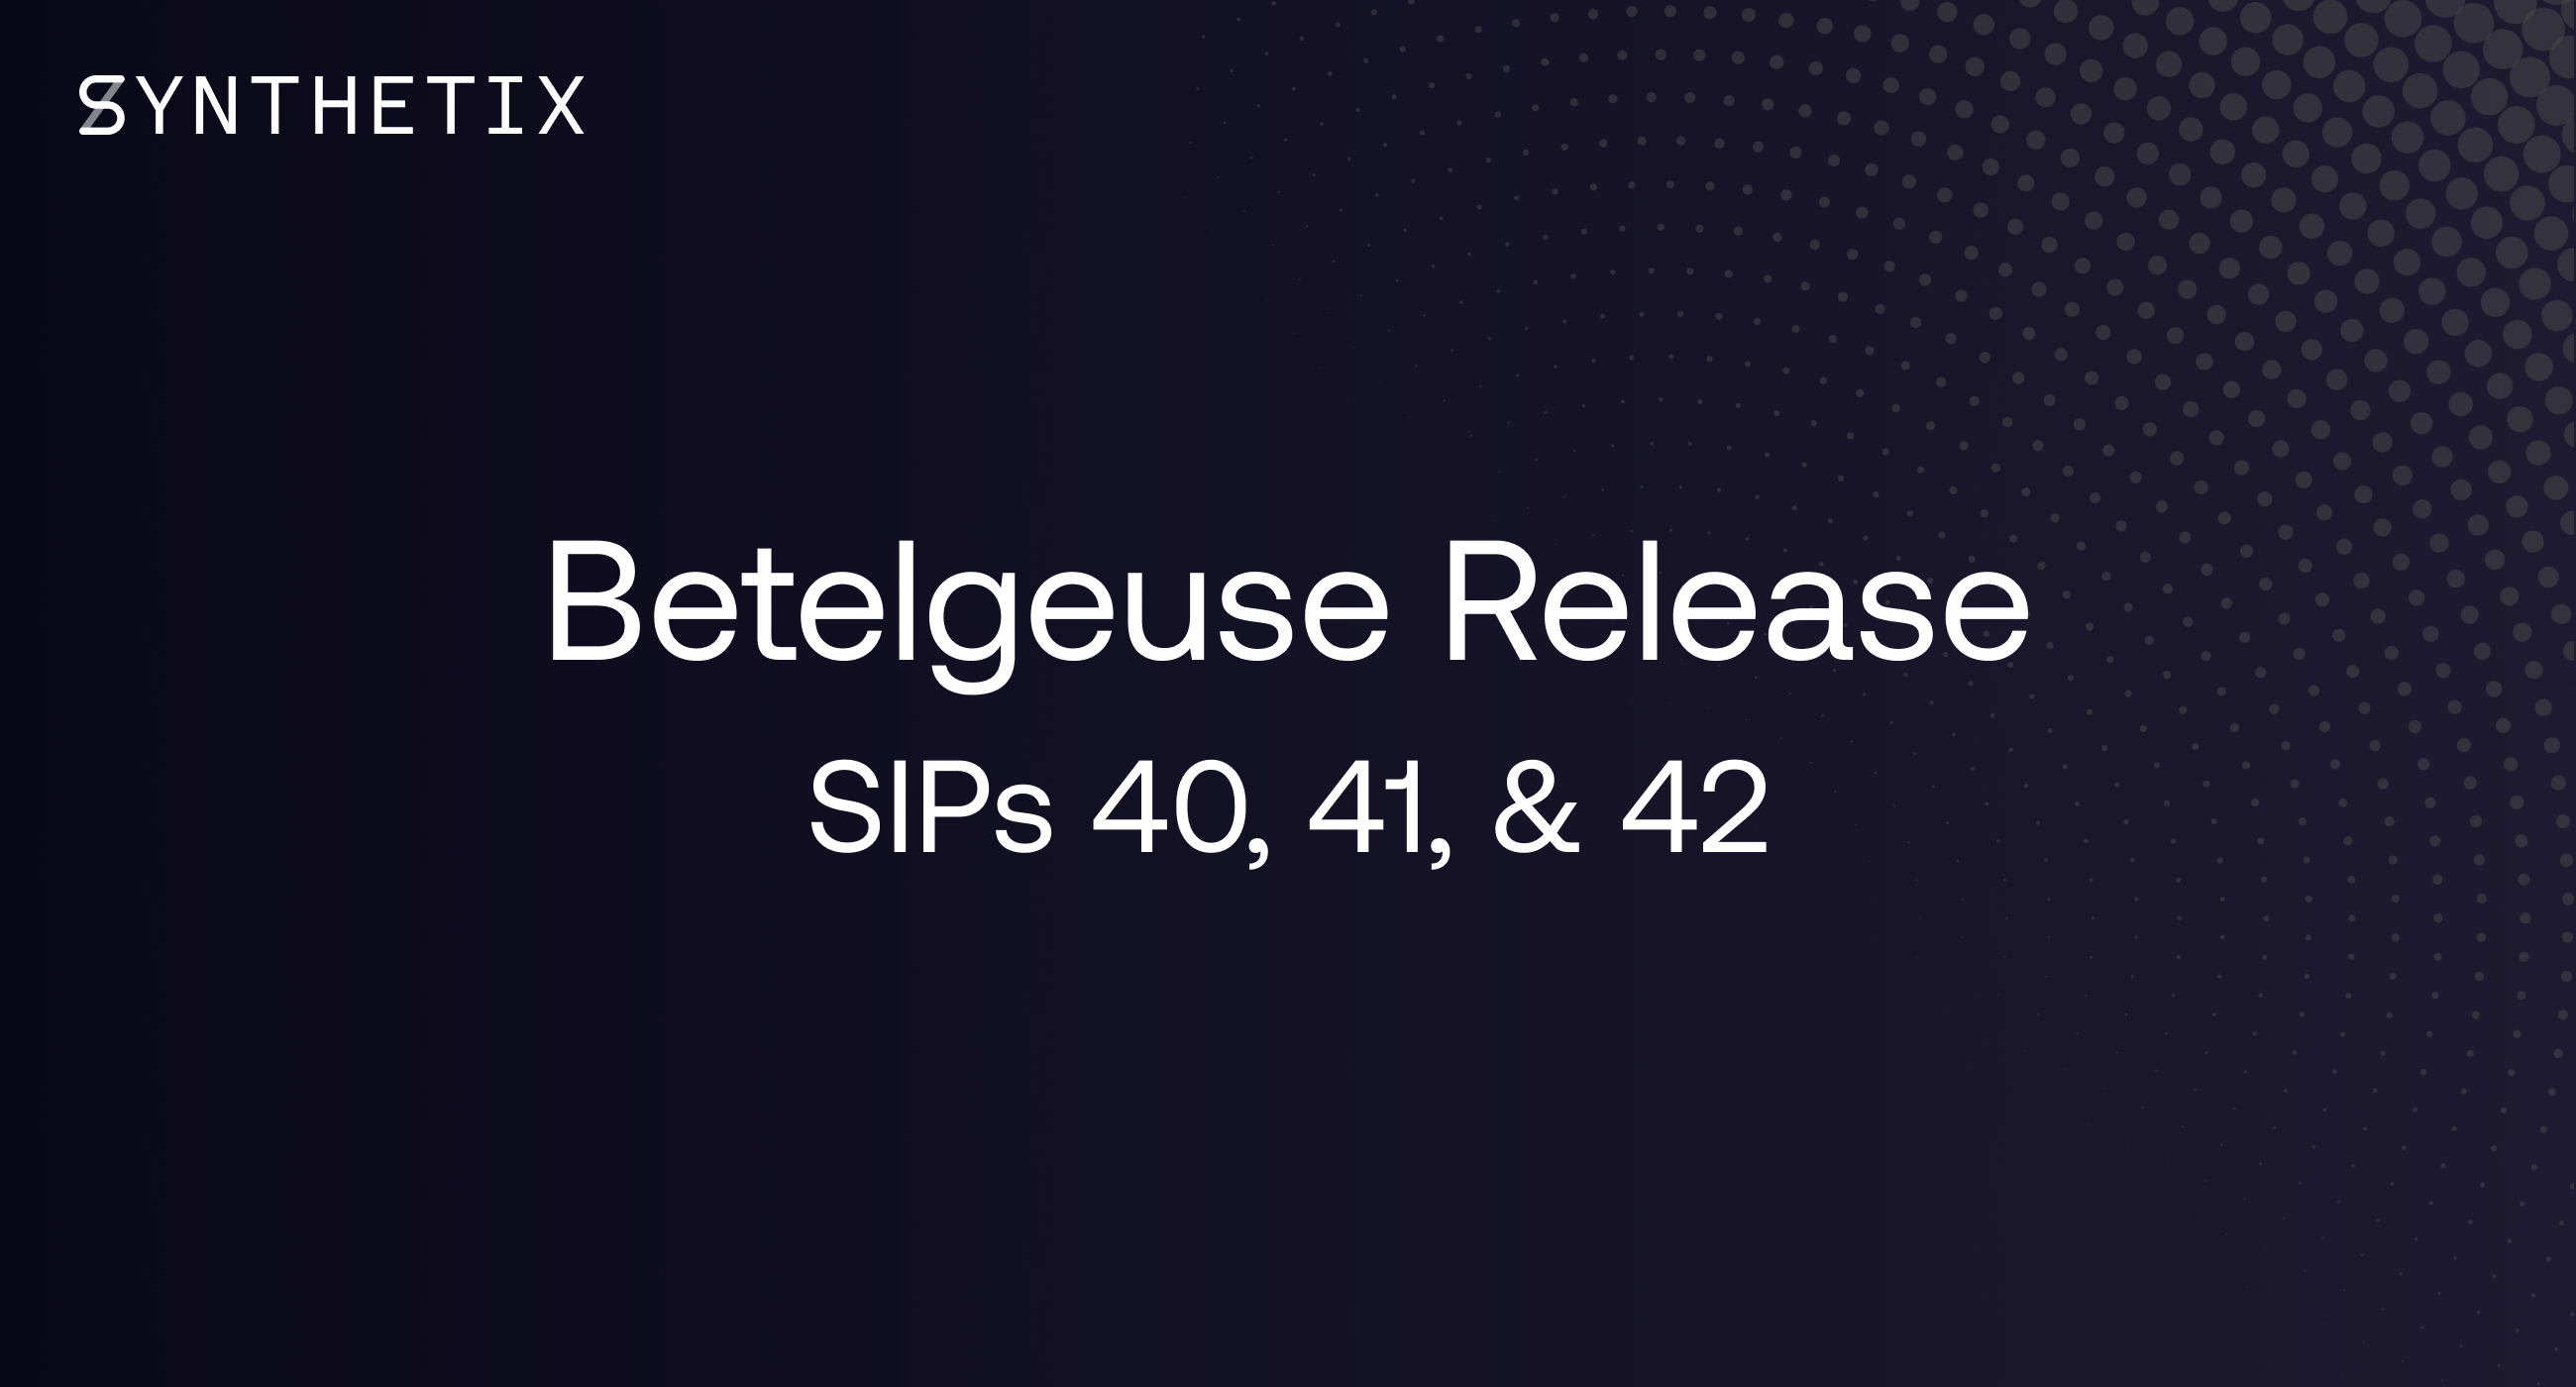 The Betelgeuse Release